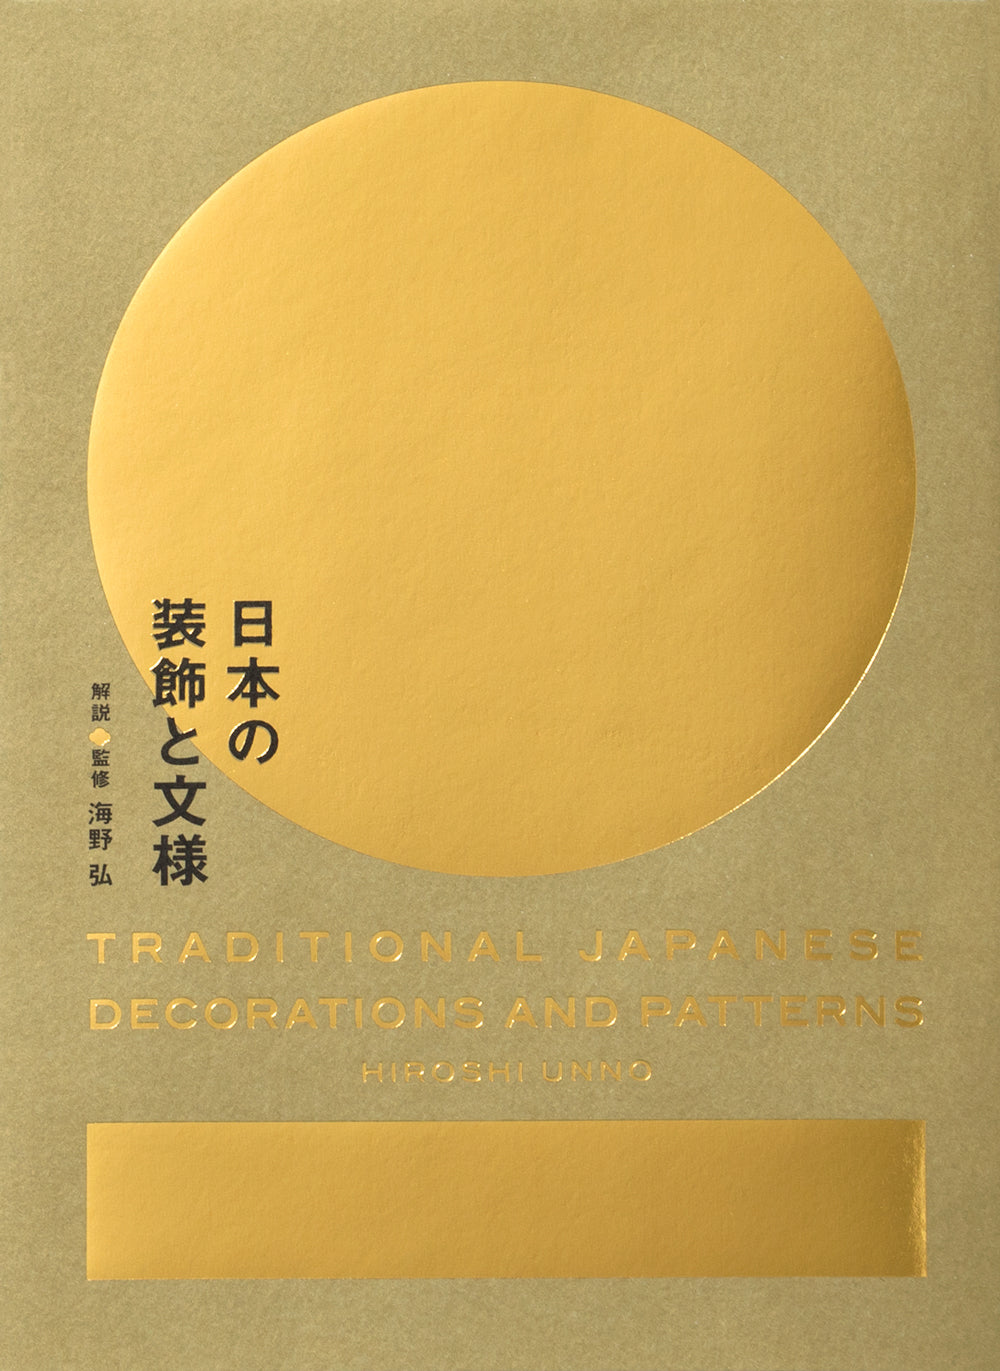 Traditional Japanese Decorations and Patterns (Japanese only, mostly visual) cover